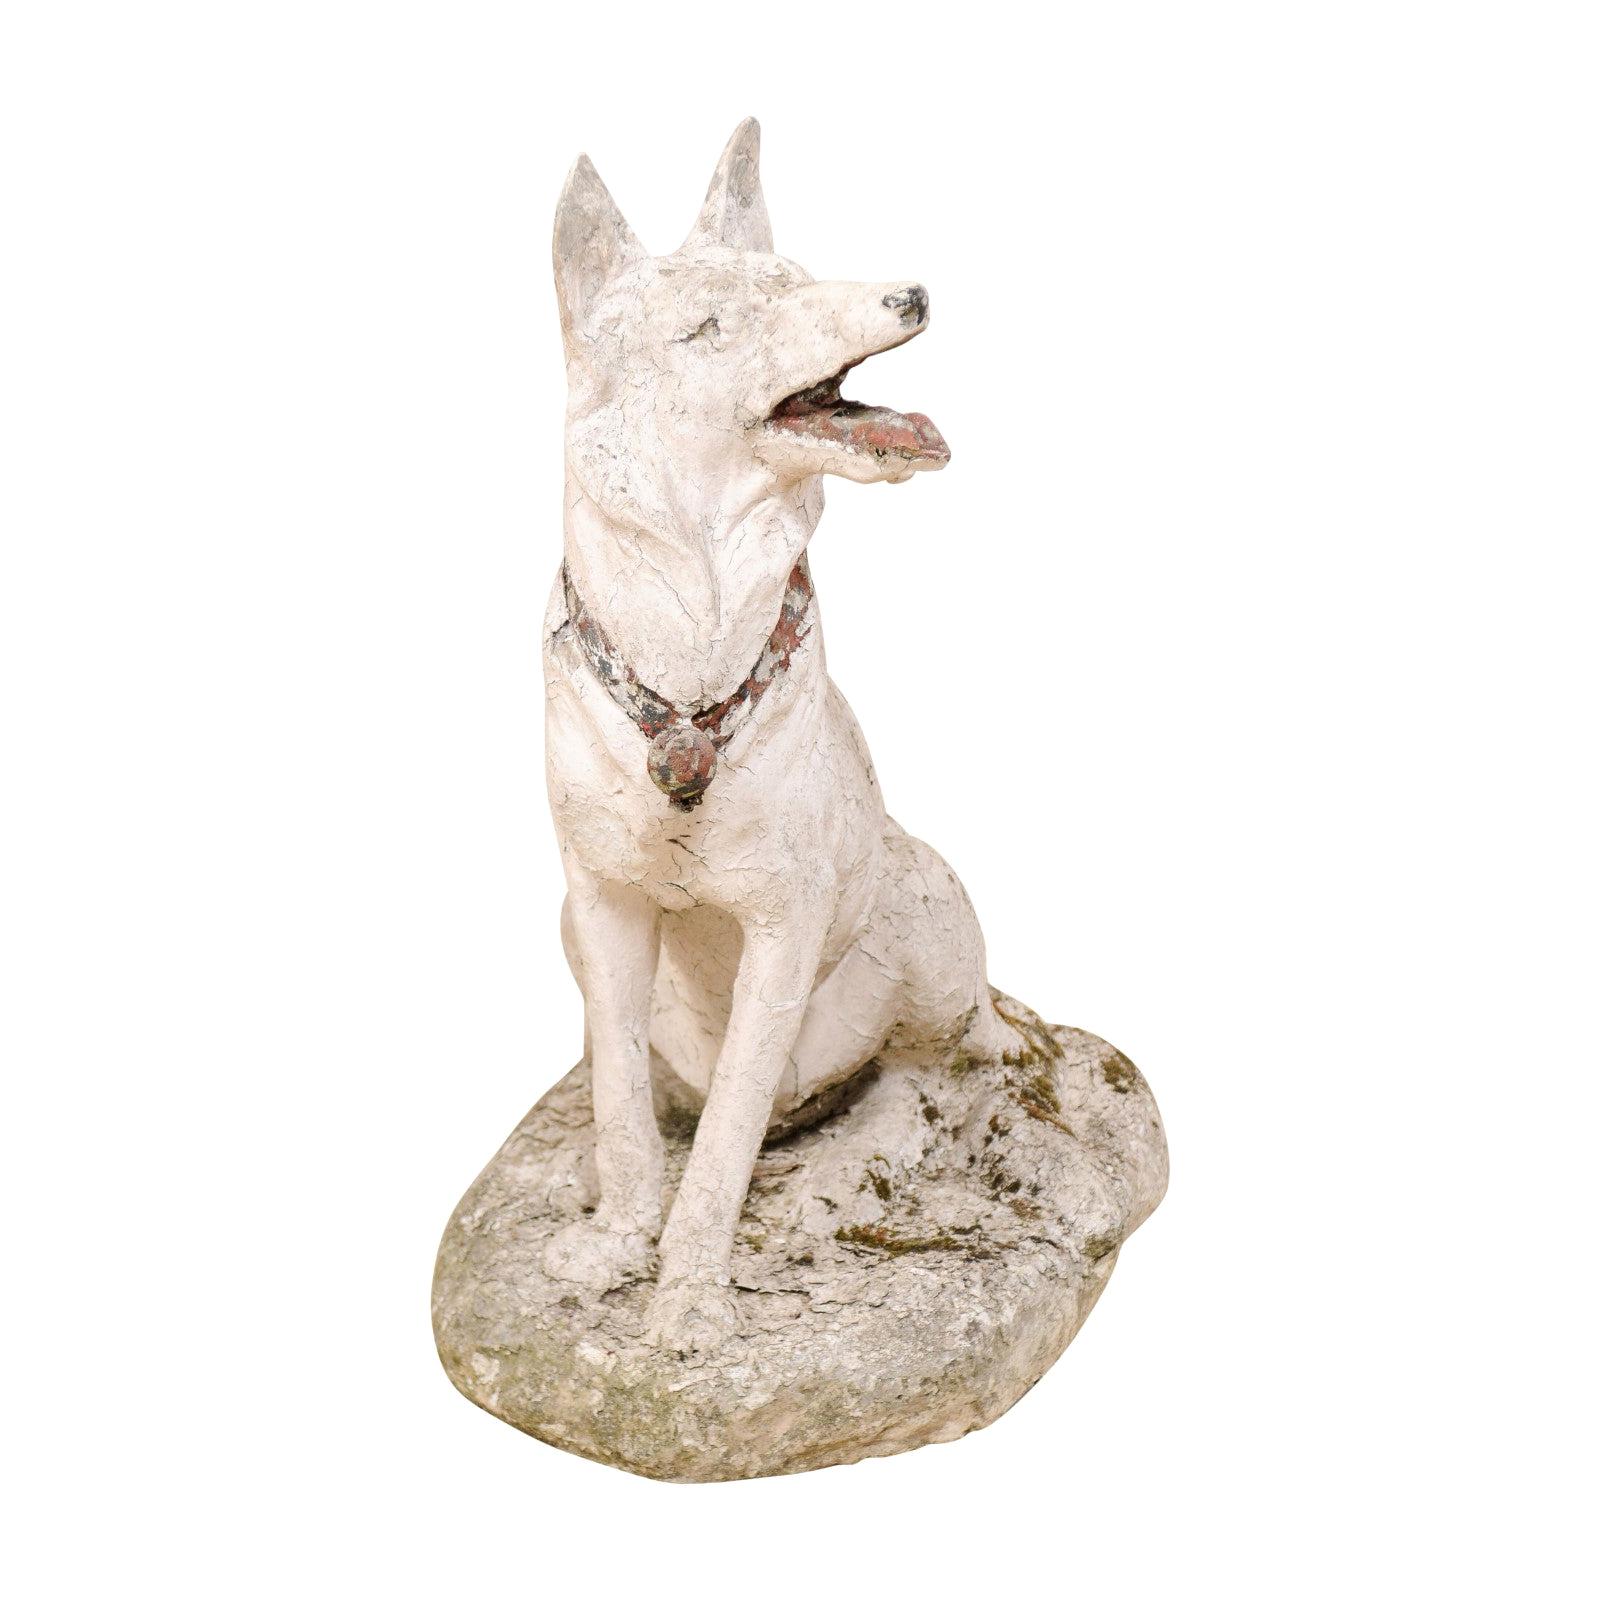 French Shepherd Dog Garden Statue from Early 20th Century, Nicely Sized